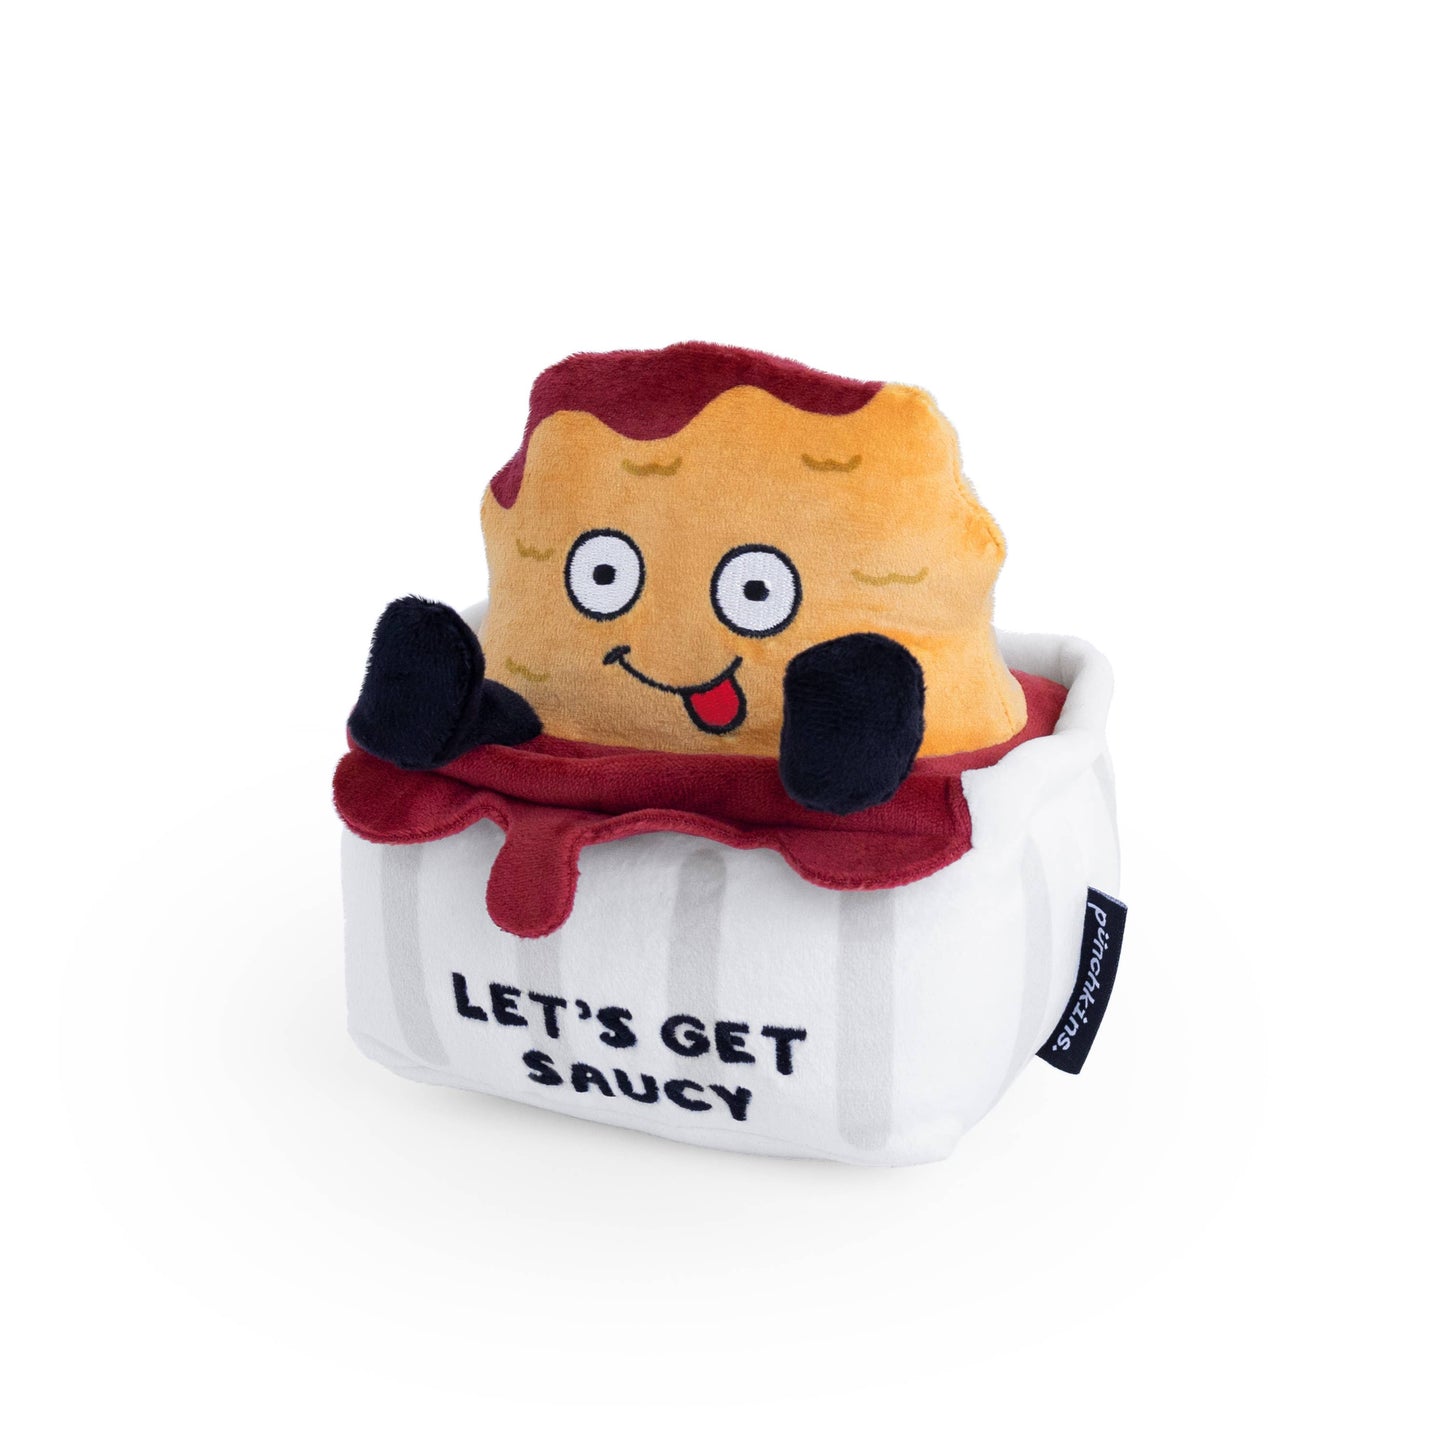 Chicken Nugget dunked in sauce plush toy -- on sauce container it reads "Let's Get Saucy" 